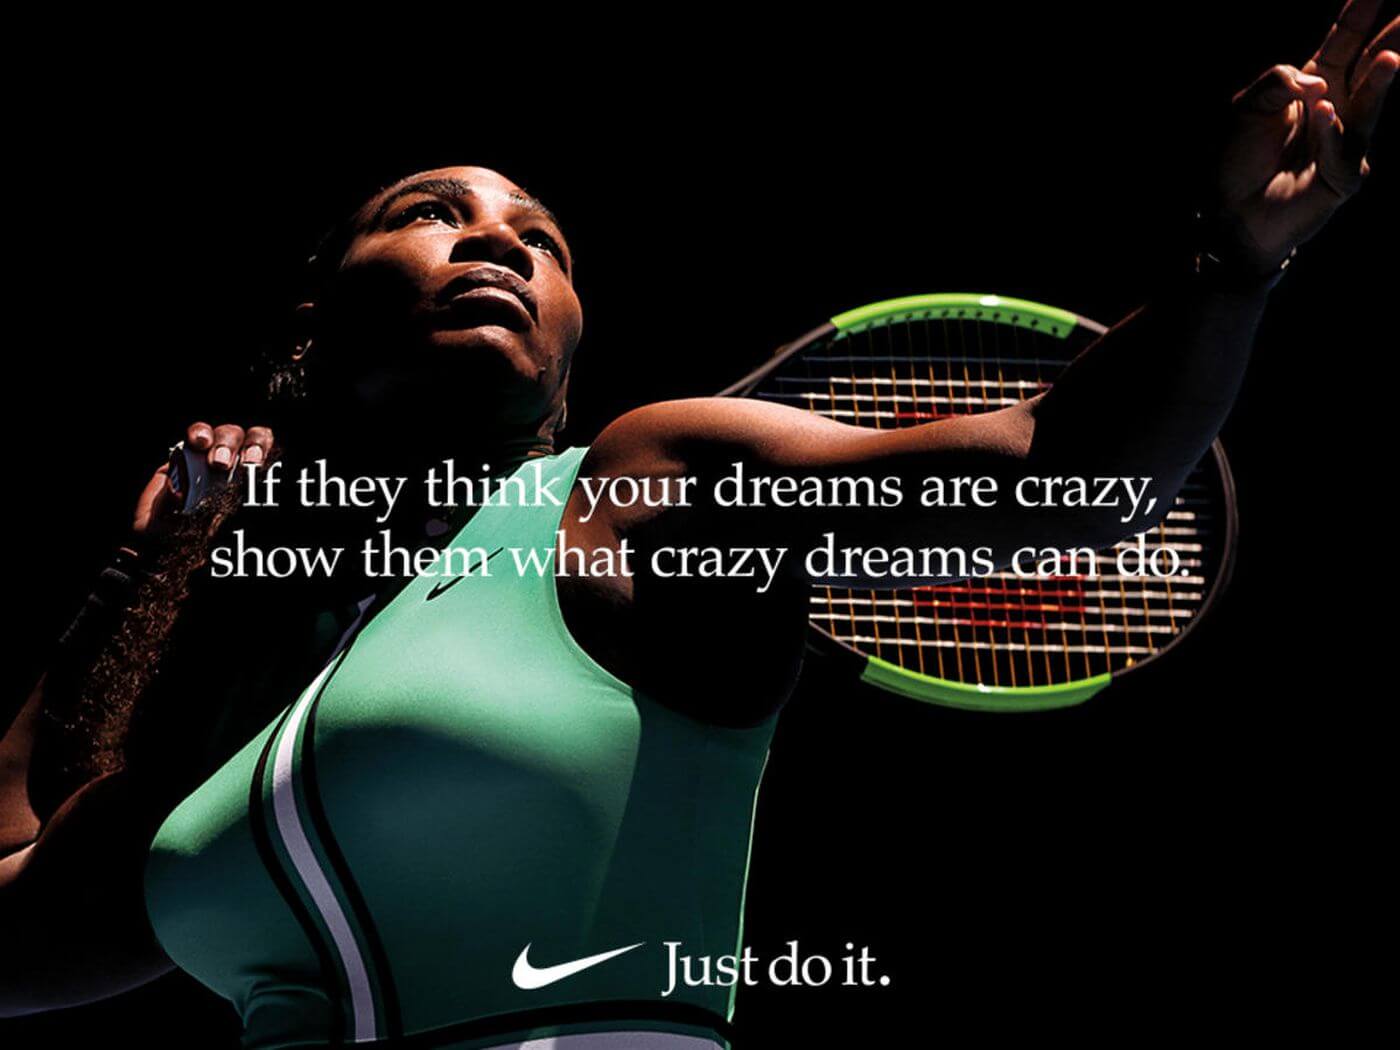 Just market it: 7 of Nike's notable campaigns